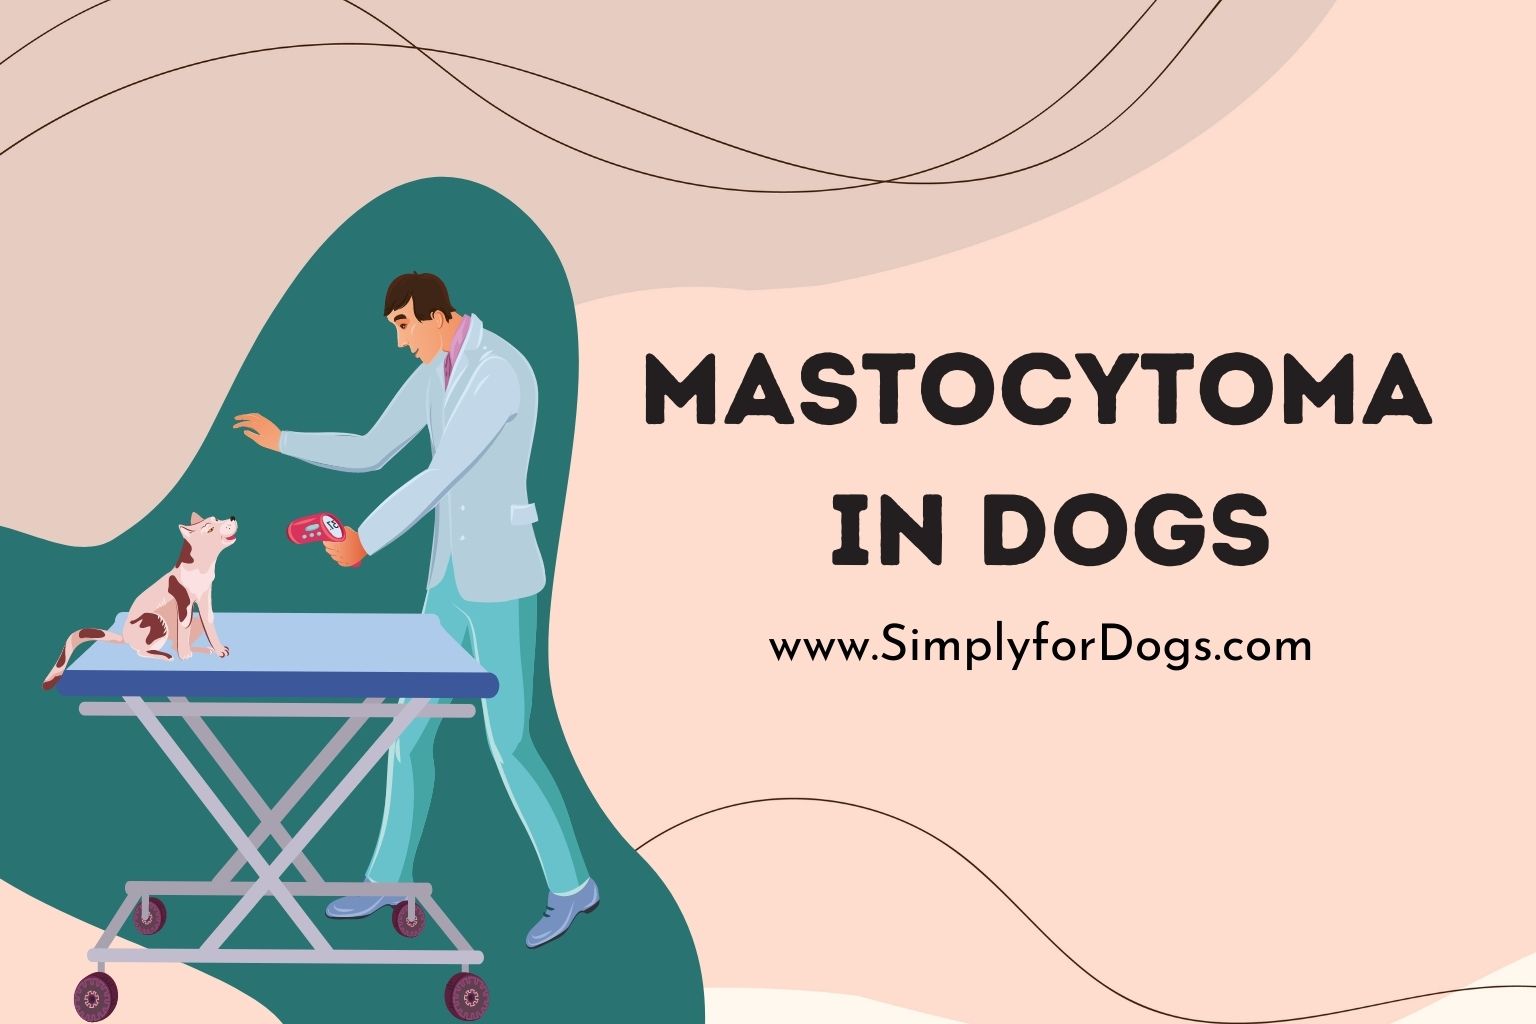 Mastocytoma in Dogs